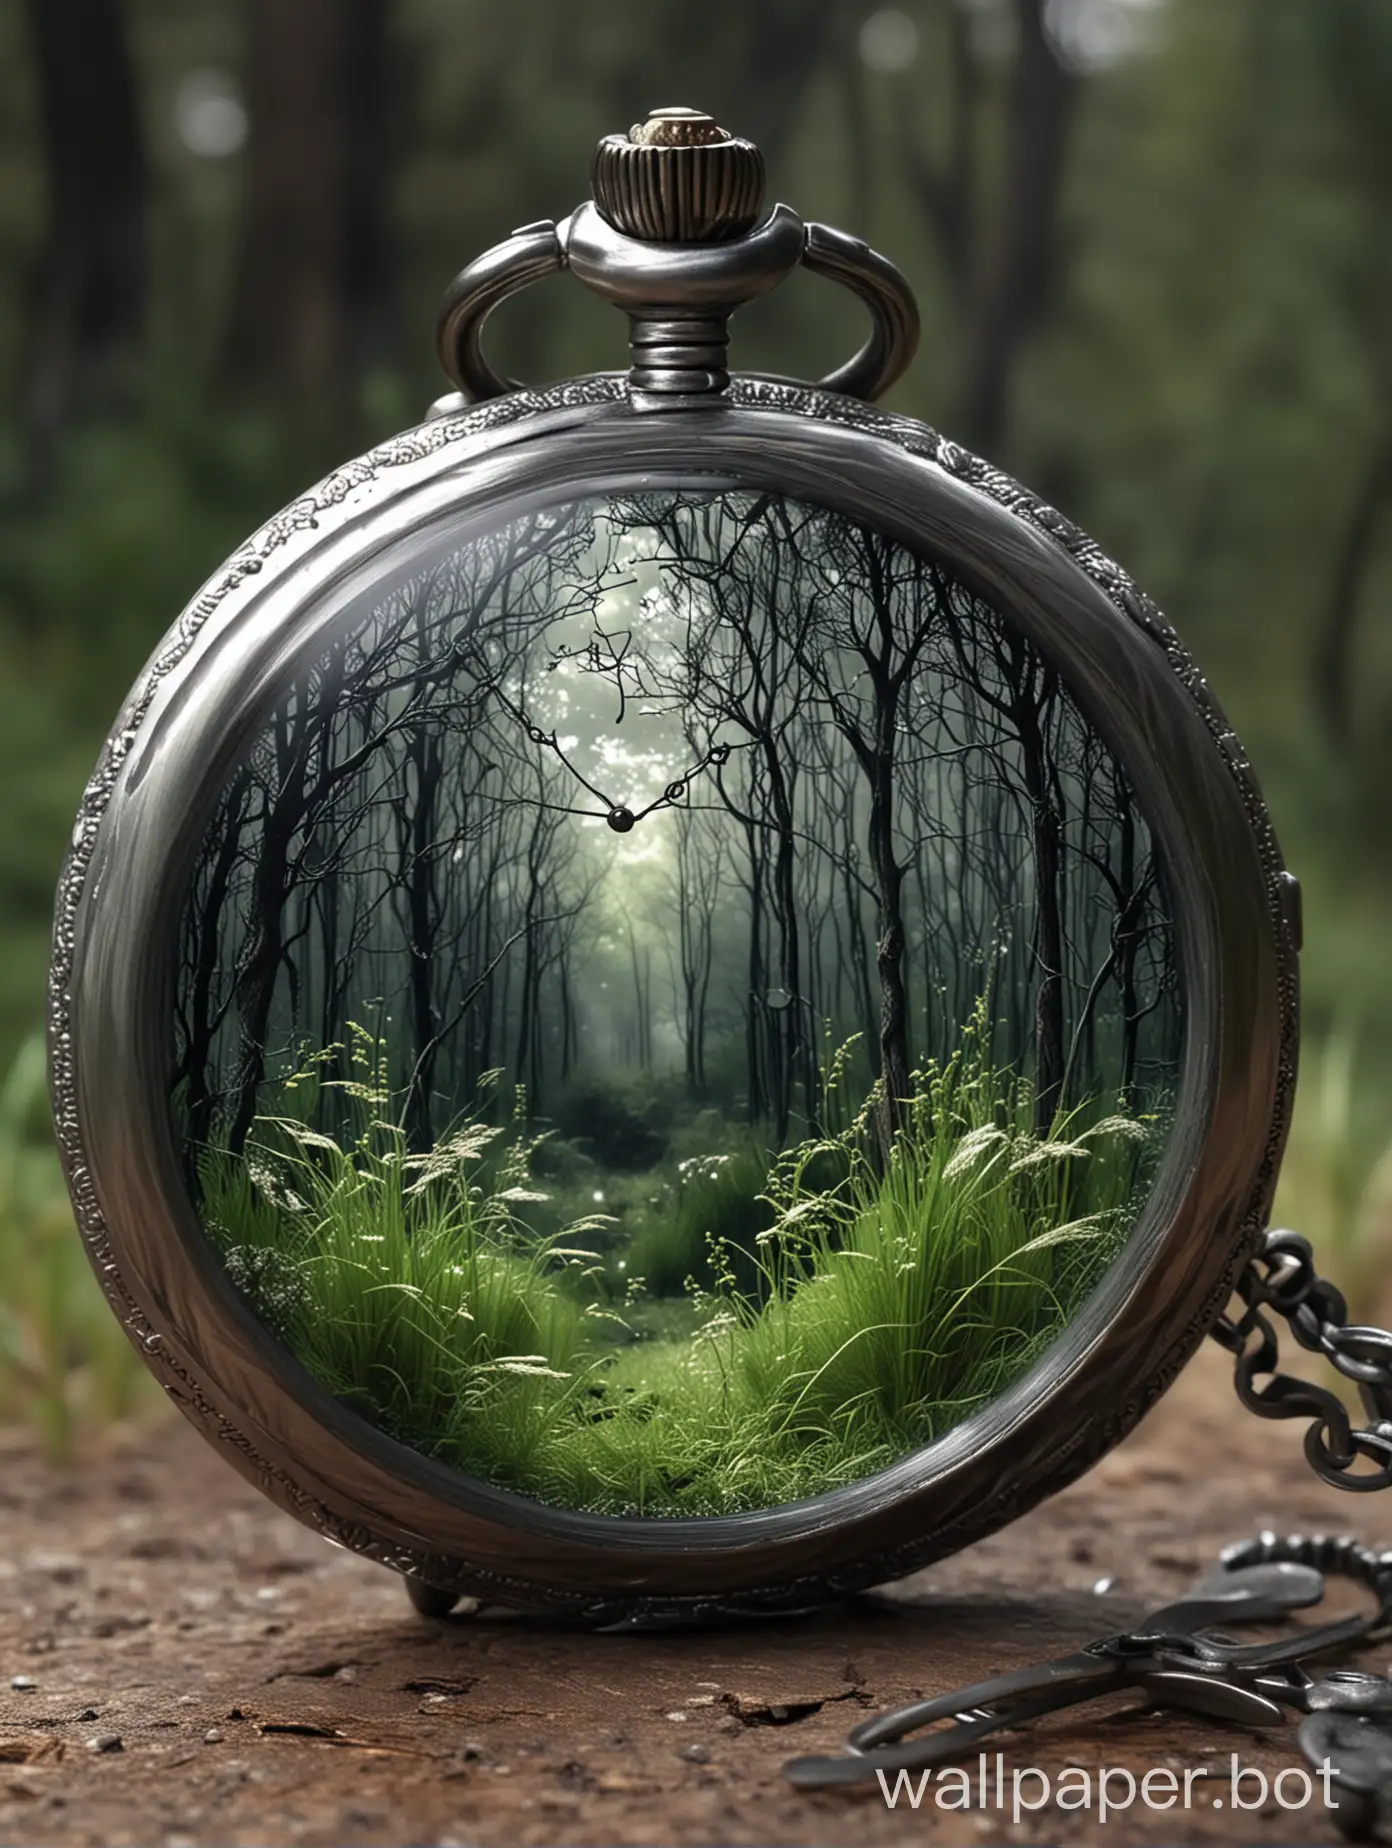 Magical forest with wild grass and foreboding trees in the glass of a titanium pocket watch